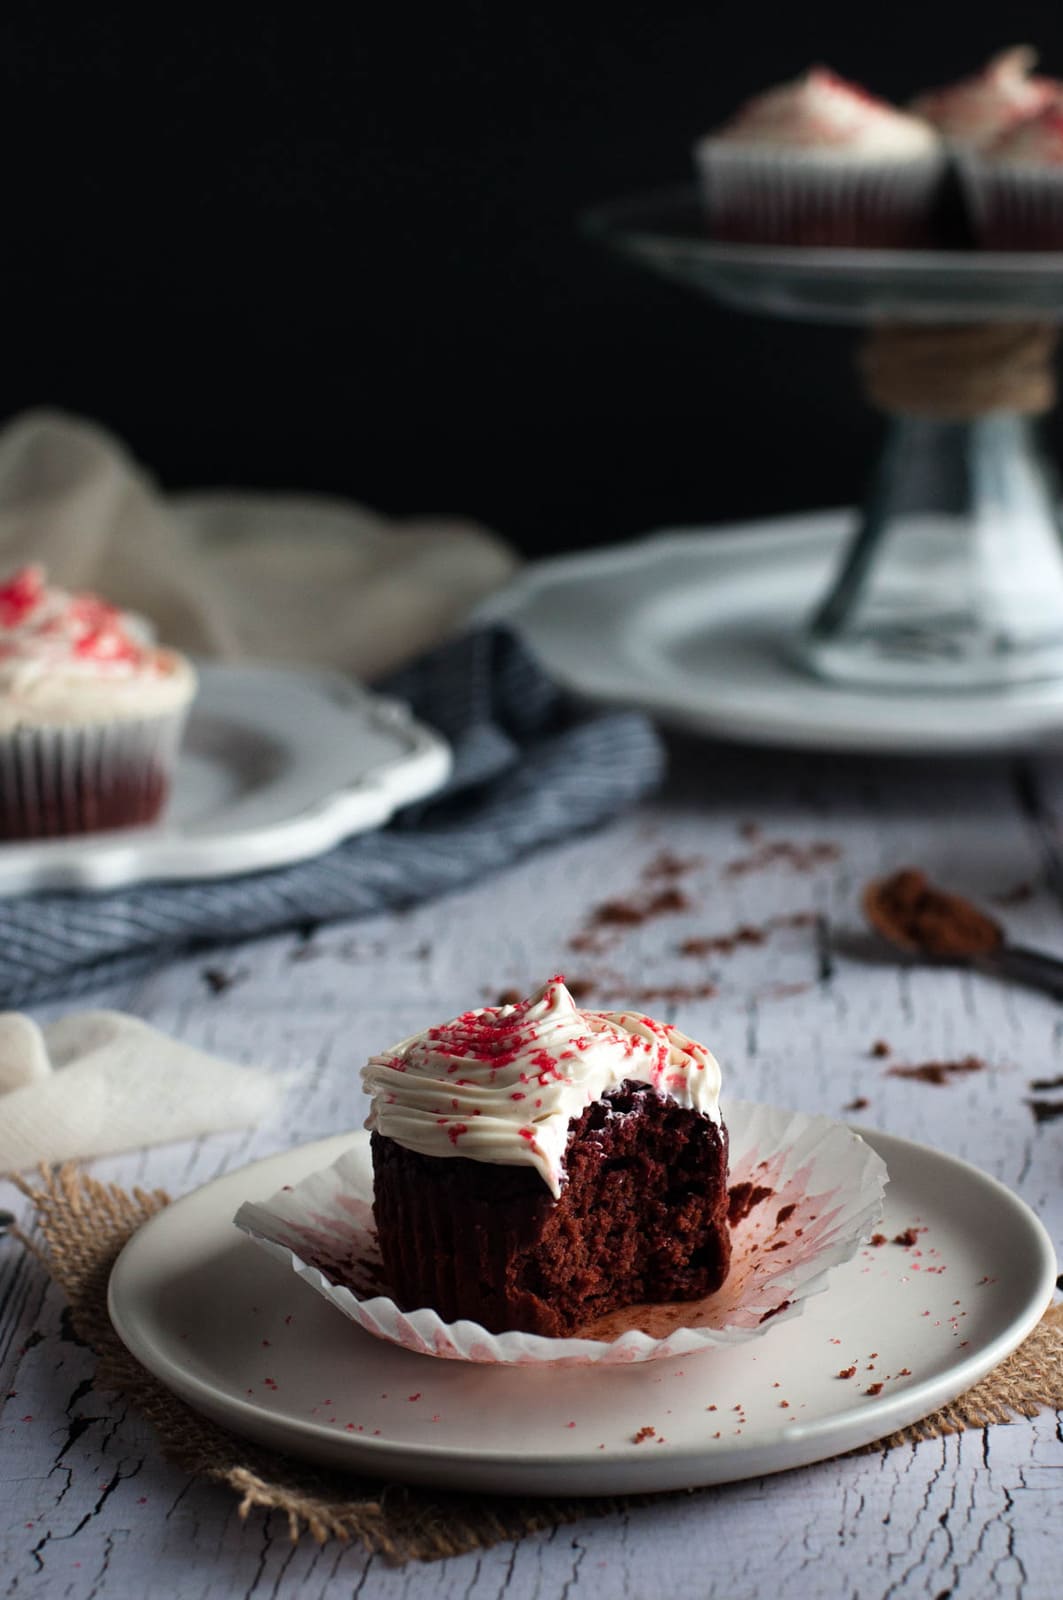 Healthy yet tasty beet red velvet cupcakes are made with whole wheat flour and no processed sugar. They're topped off with a decadent cream cheese frosting.